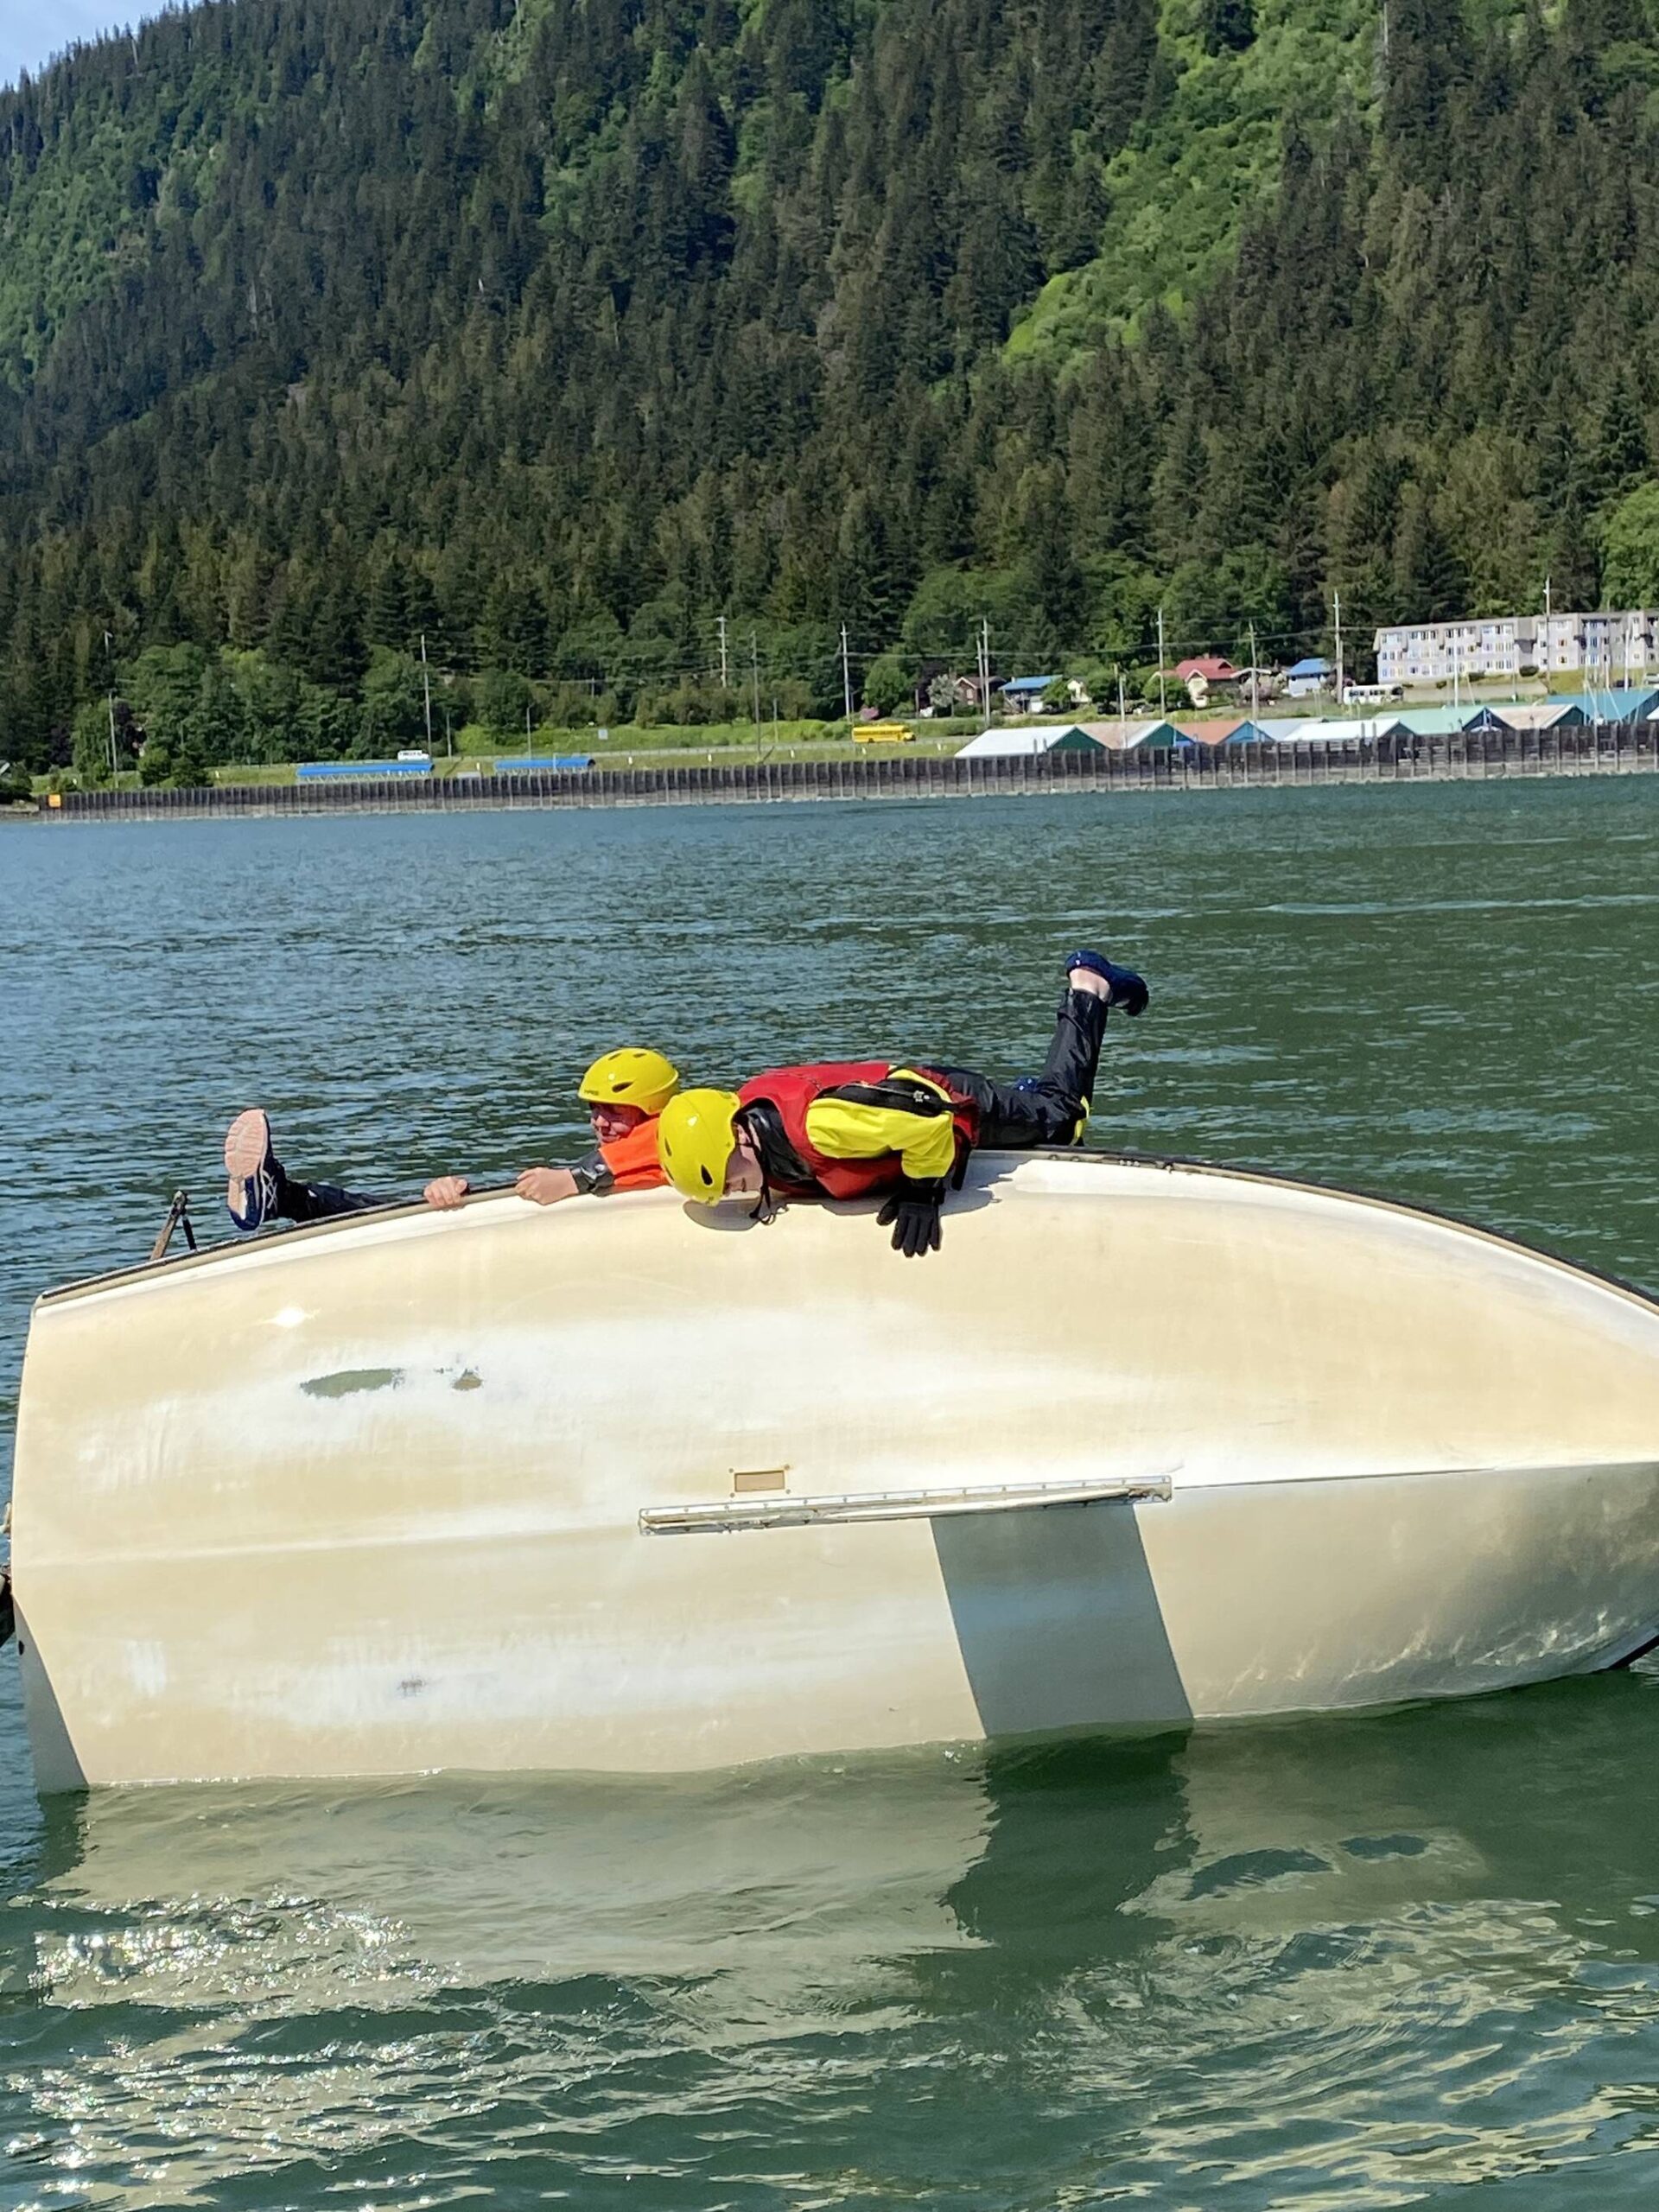 Lauren Stichert, 16, and Angus Andrews, 14, climb aboard a capsized sailboat during a sailing lesson this week in Gastineau Channel. (Photo by Adrian Whitney)